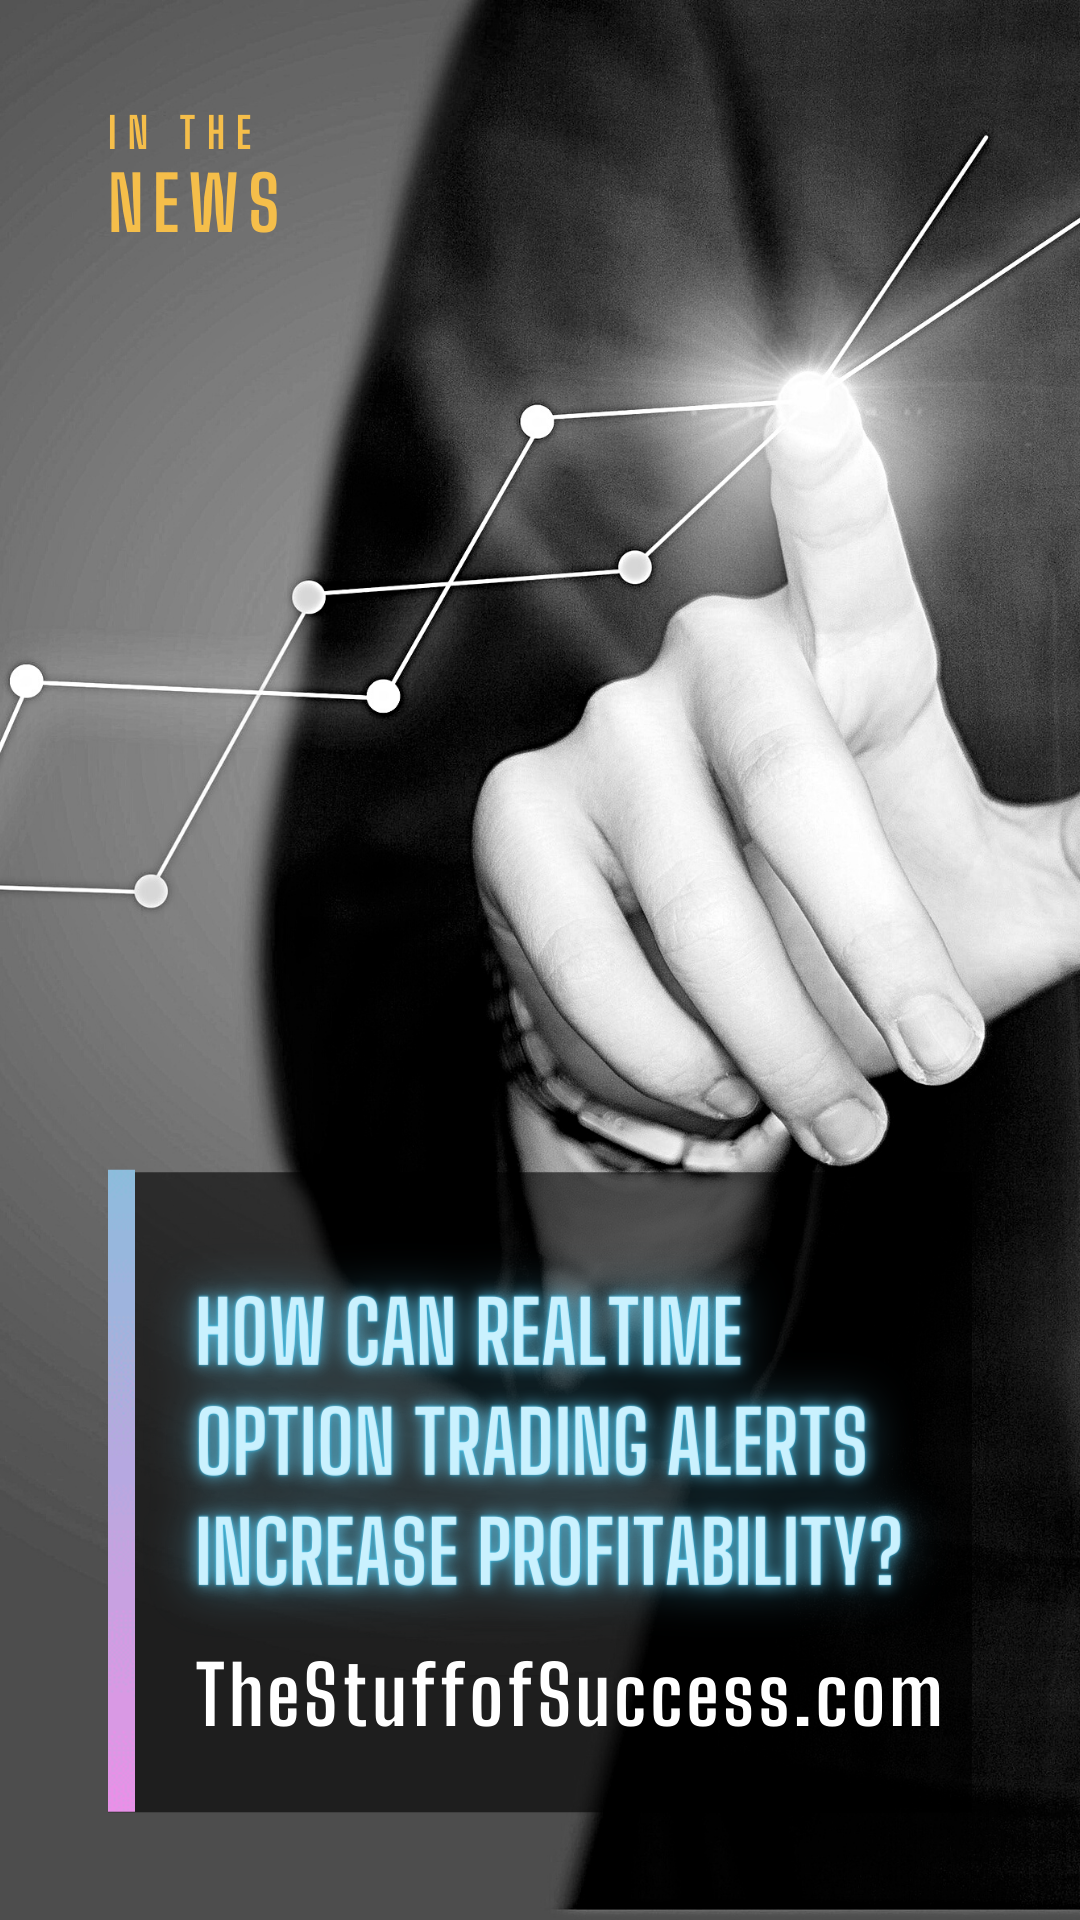 How Can Realtime Option Trading Alerts Increase Profitability?